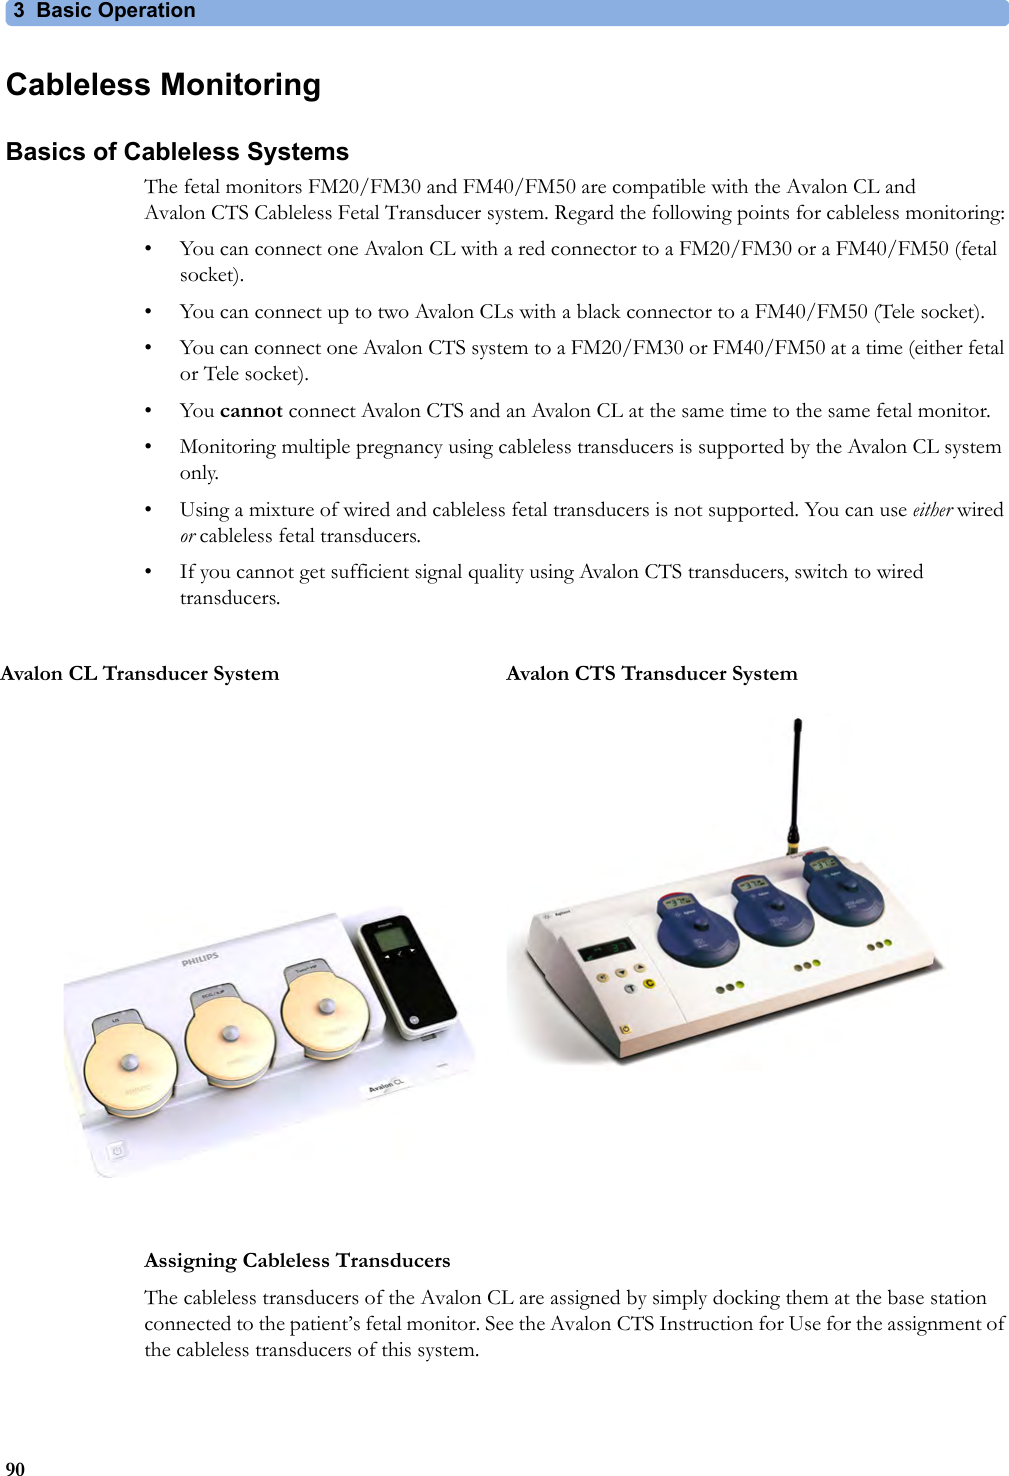 3 Basic Operation90Cableless MonitoringBasics of Cableless SystemsThe fetal monitors FM20/FM30 and FM40/FM50 are compatible with the Avalon CL and Avalon CTS Cableless Fetal Transducer system. Regard the following points for cableless monitoring:• You can connect one Avalon CL with a red connector to a FM20/FM30 or a FM40/FM50 (fetal socket).• You can connect up to two Avalon CLs with a black connector to a FM40/FM50 (Tele socket).• You can connect one Avalon CTS system to a FM20/FM30 or FM40/FM50 at a time (either fetal or Tele socket).•You cannot connect Avalon CTS and an Avalon CL at the same time to the same fetal monitor. • Monitoring multiple pregnancy using cableless transducers is supported by the Avalon CL system only.• Using a mixture of wired and cableless fetal transducers is not supported. You can use either wired or cableless fetal transducers. • If you cannot get sufficient signal quality using Avalon CTS transducers, switch to wired transducers.Assigning Cableless TransducersThe cableless transducers of the Avalon CL are assigned by simply docking them at the base station connected to the patient’s fetal monitor. See the Avalon CTS Instruction for Use for the assignment of the cableless transducers of this system.Avalon CL Transducer System Avalon CTS Transducer System